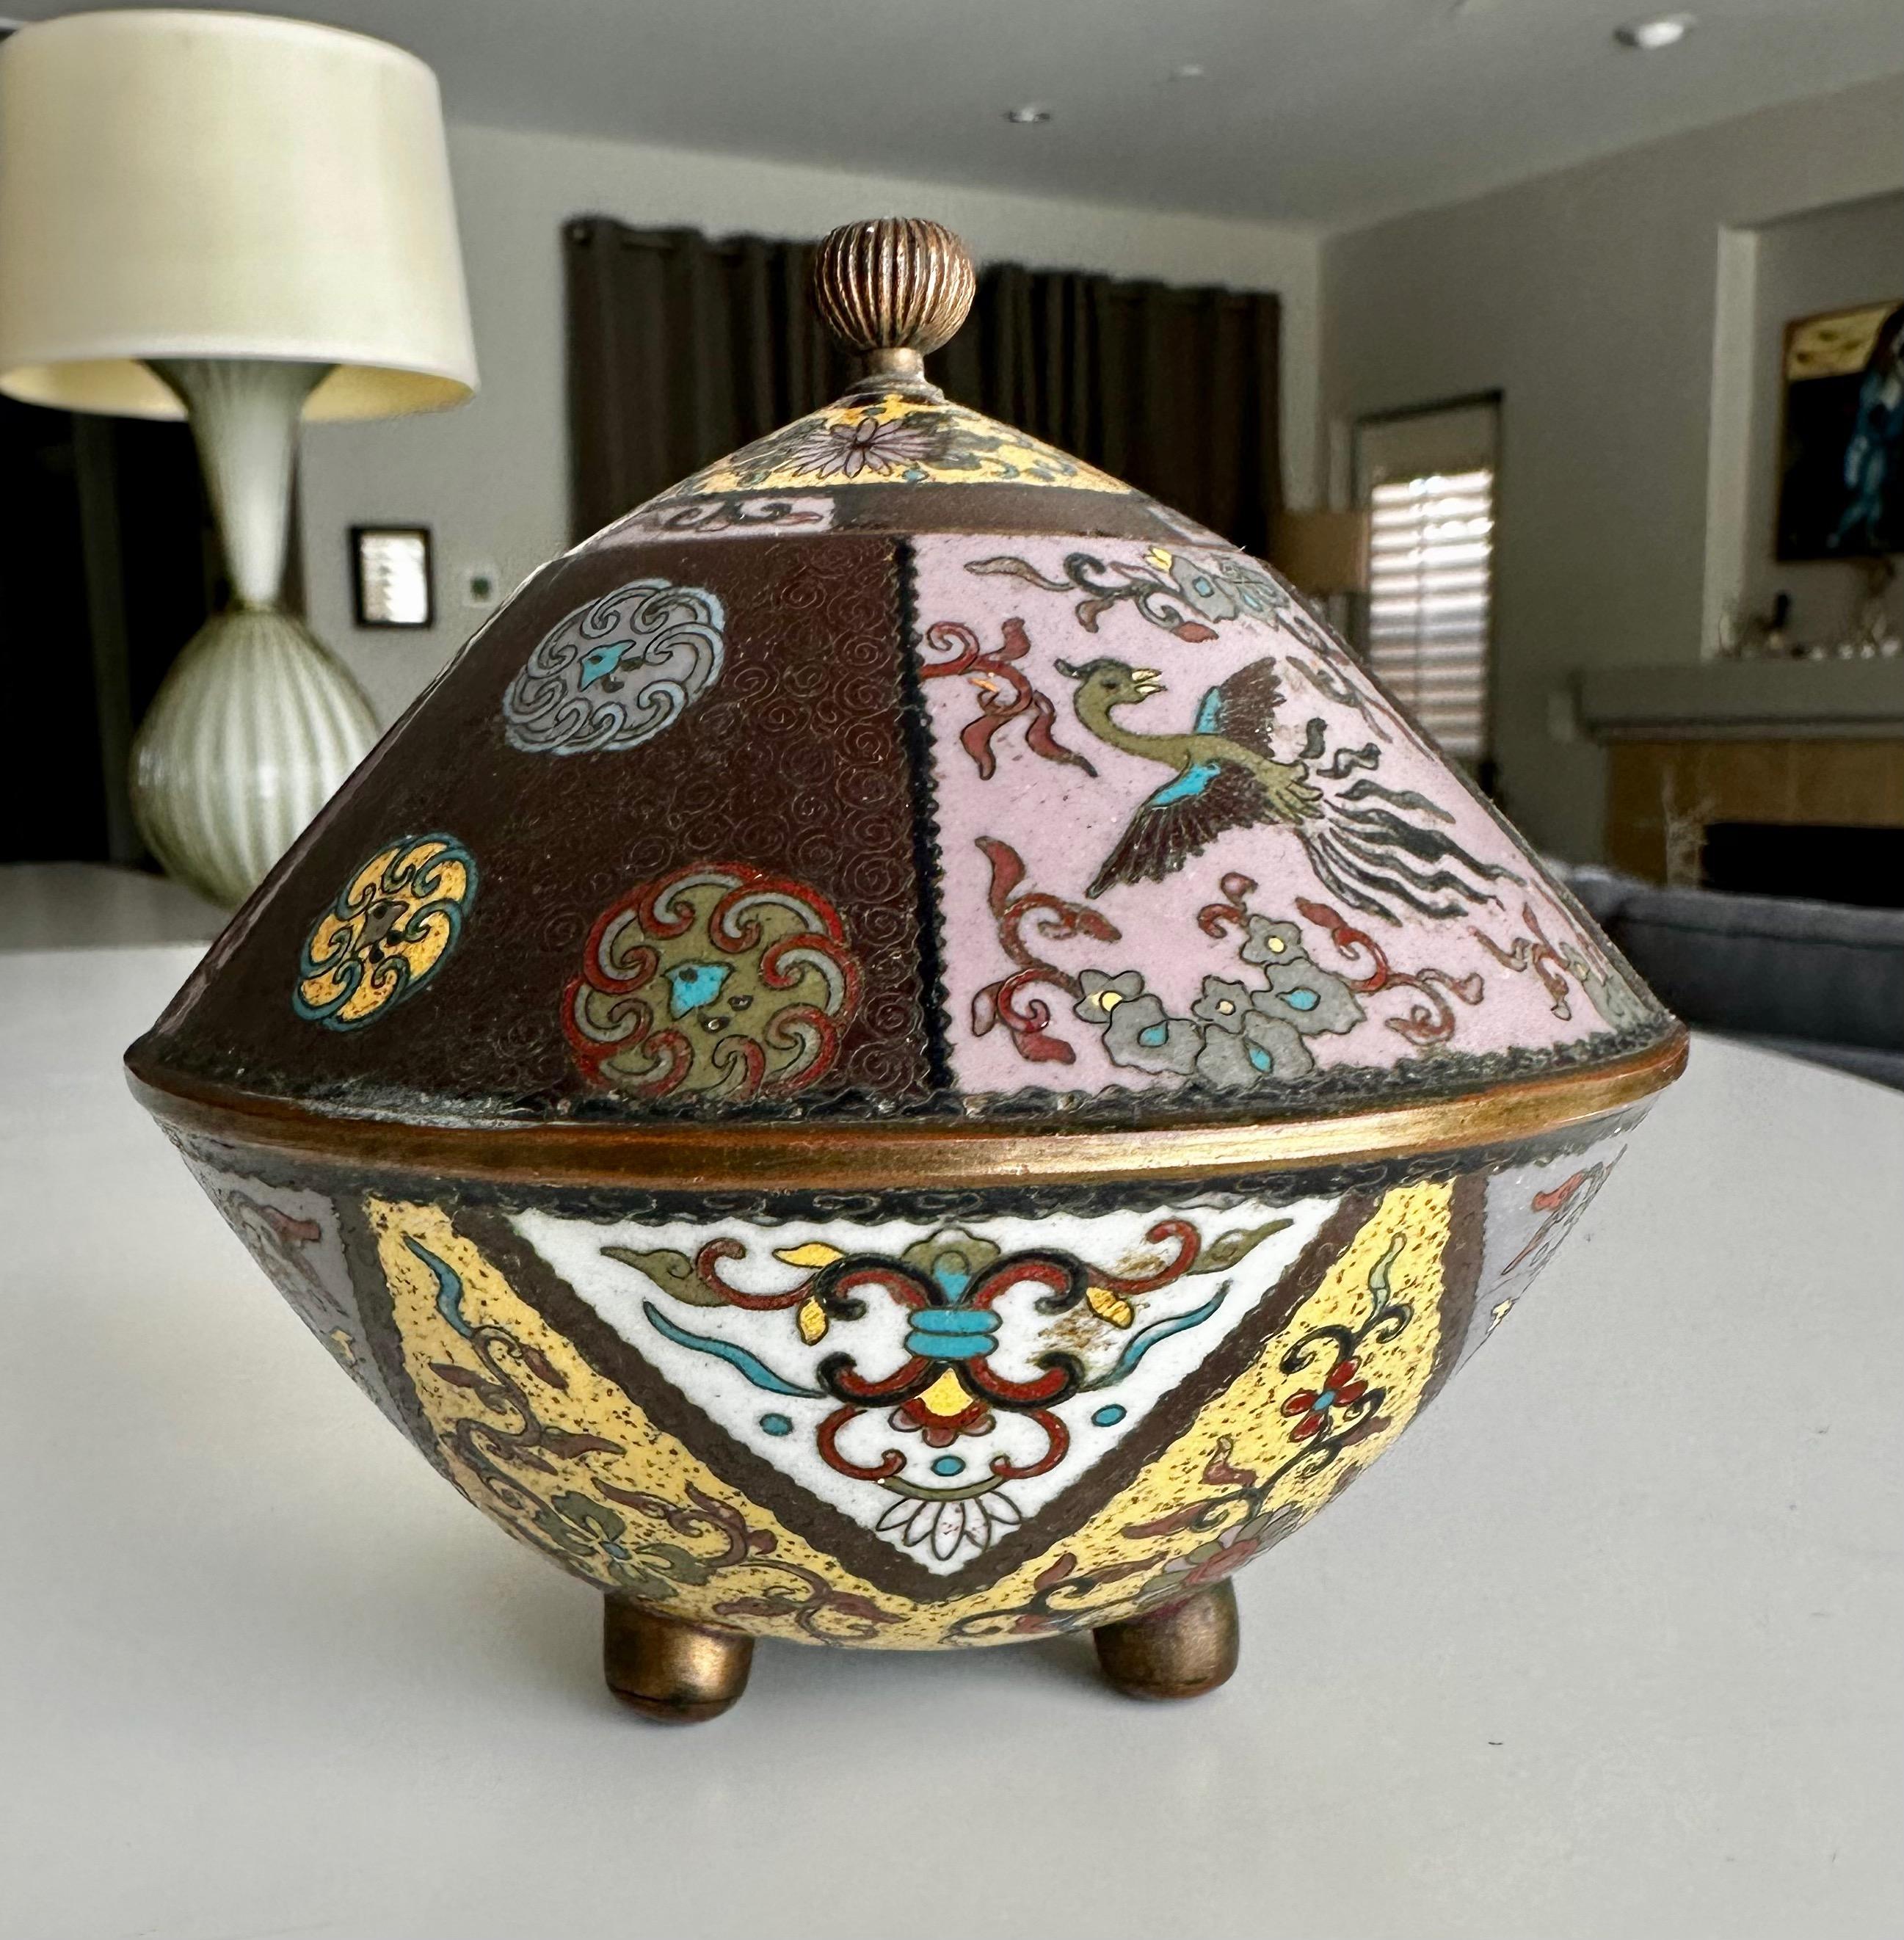 Antique Japanese Meiji period cloisonne enamel lidded koro incense burner standing on brass footed base. Embellished with stylized phoenix birds, geometrical ornaments, along with floral and foliage motifs throughout.. 